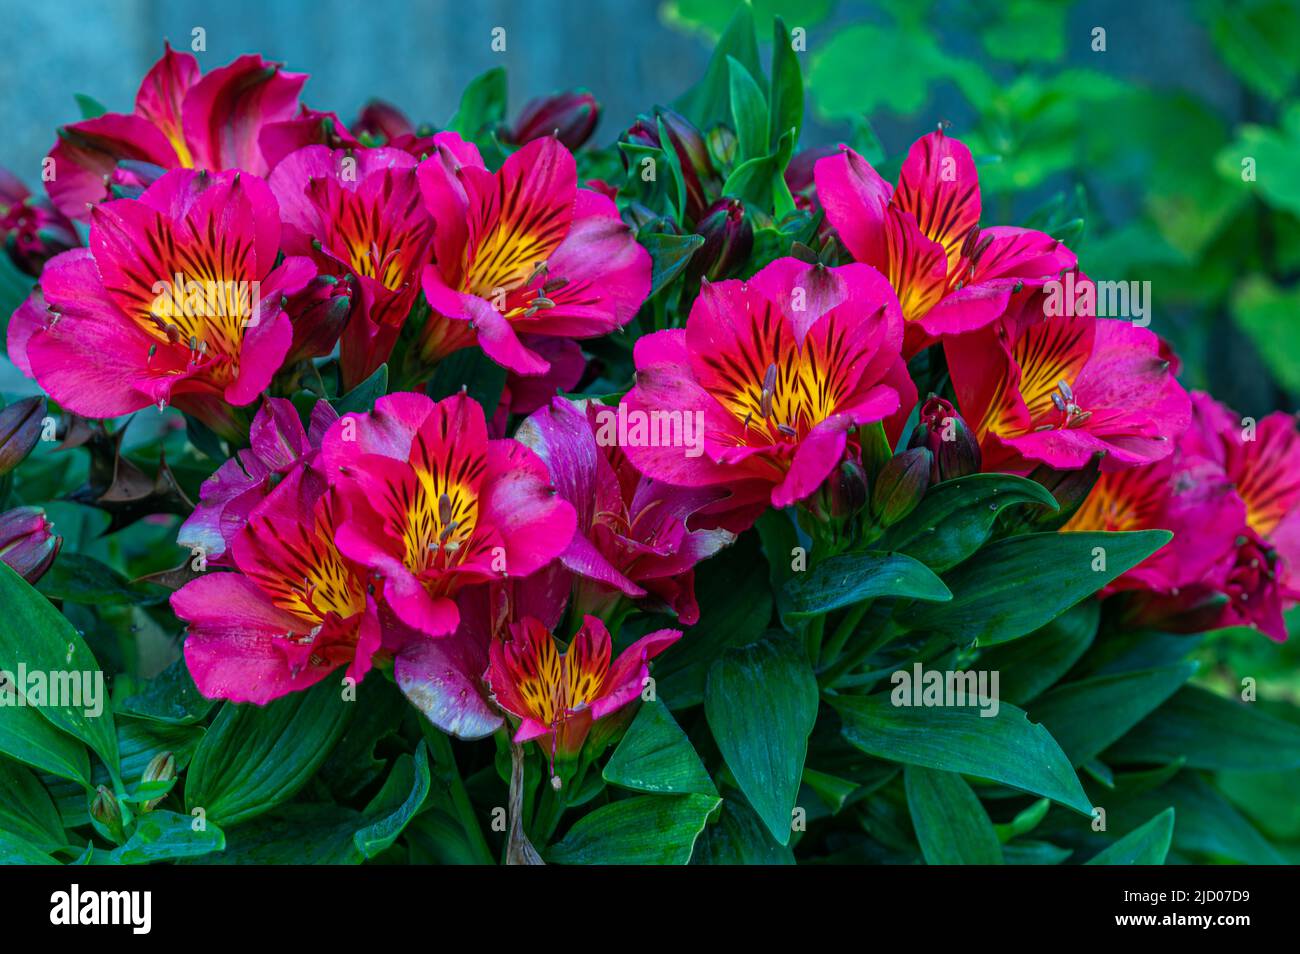 Alstroemeria an indoor or out door flower with bright coloured flower heads. Growing in a North Norfolk garden, UK Stock Photo